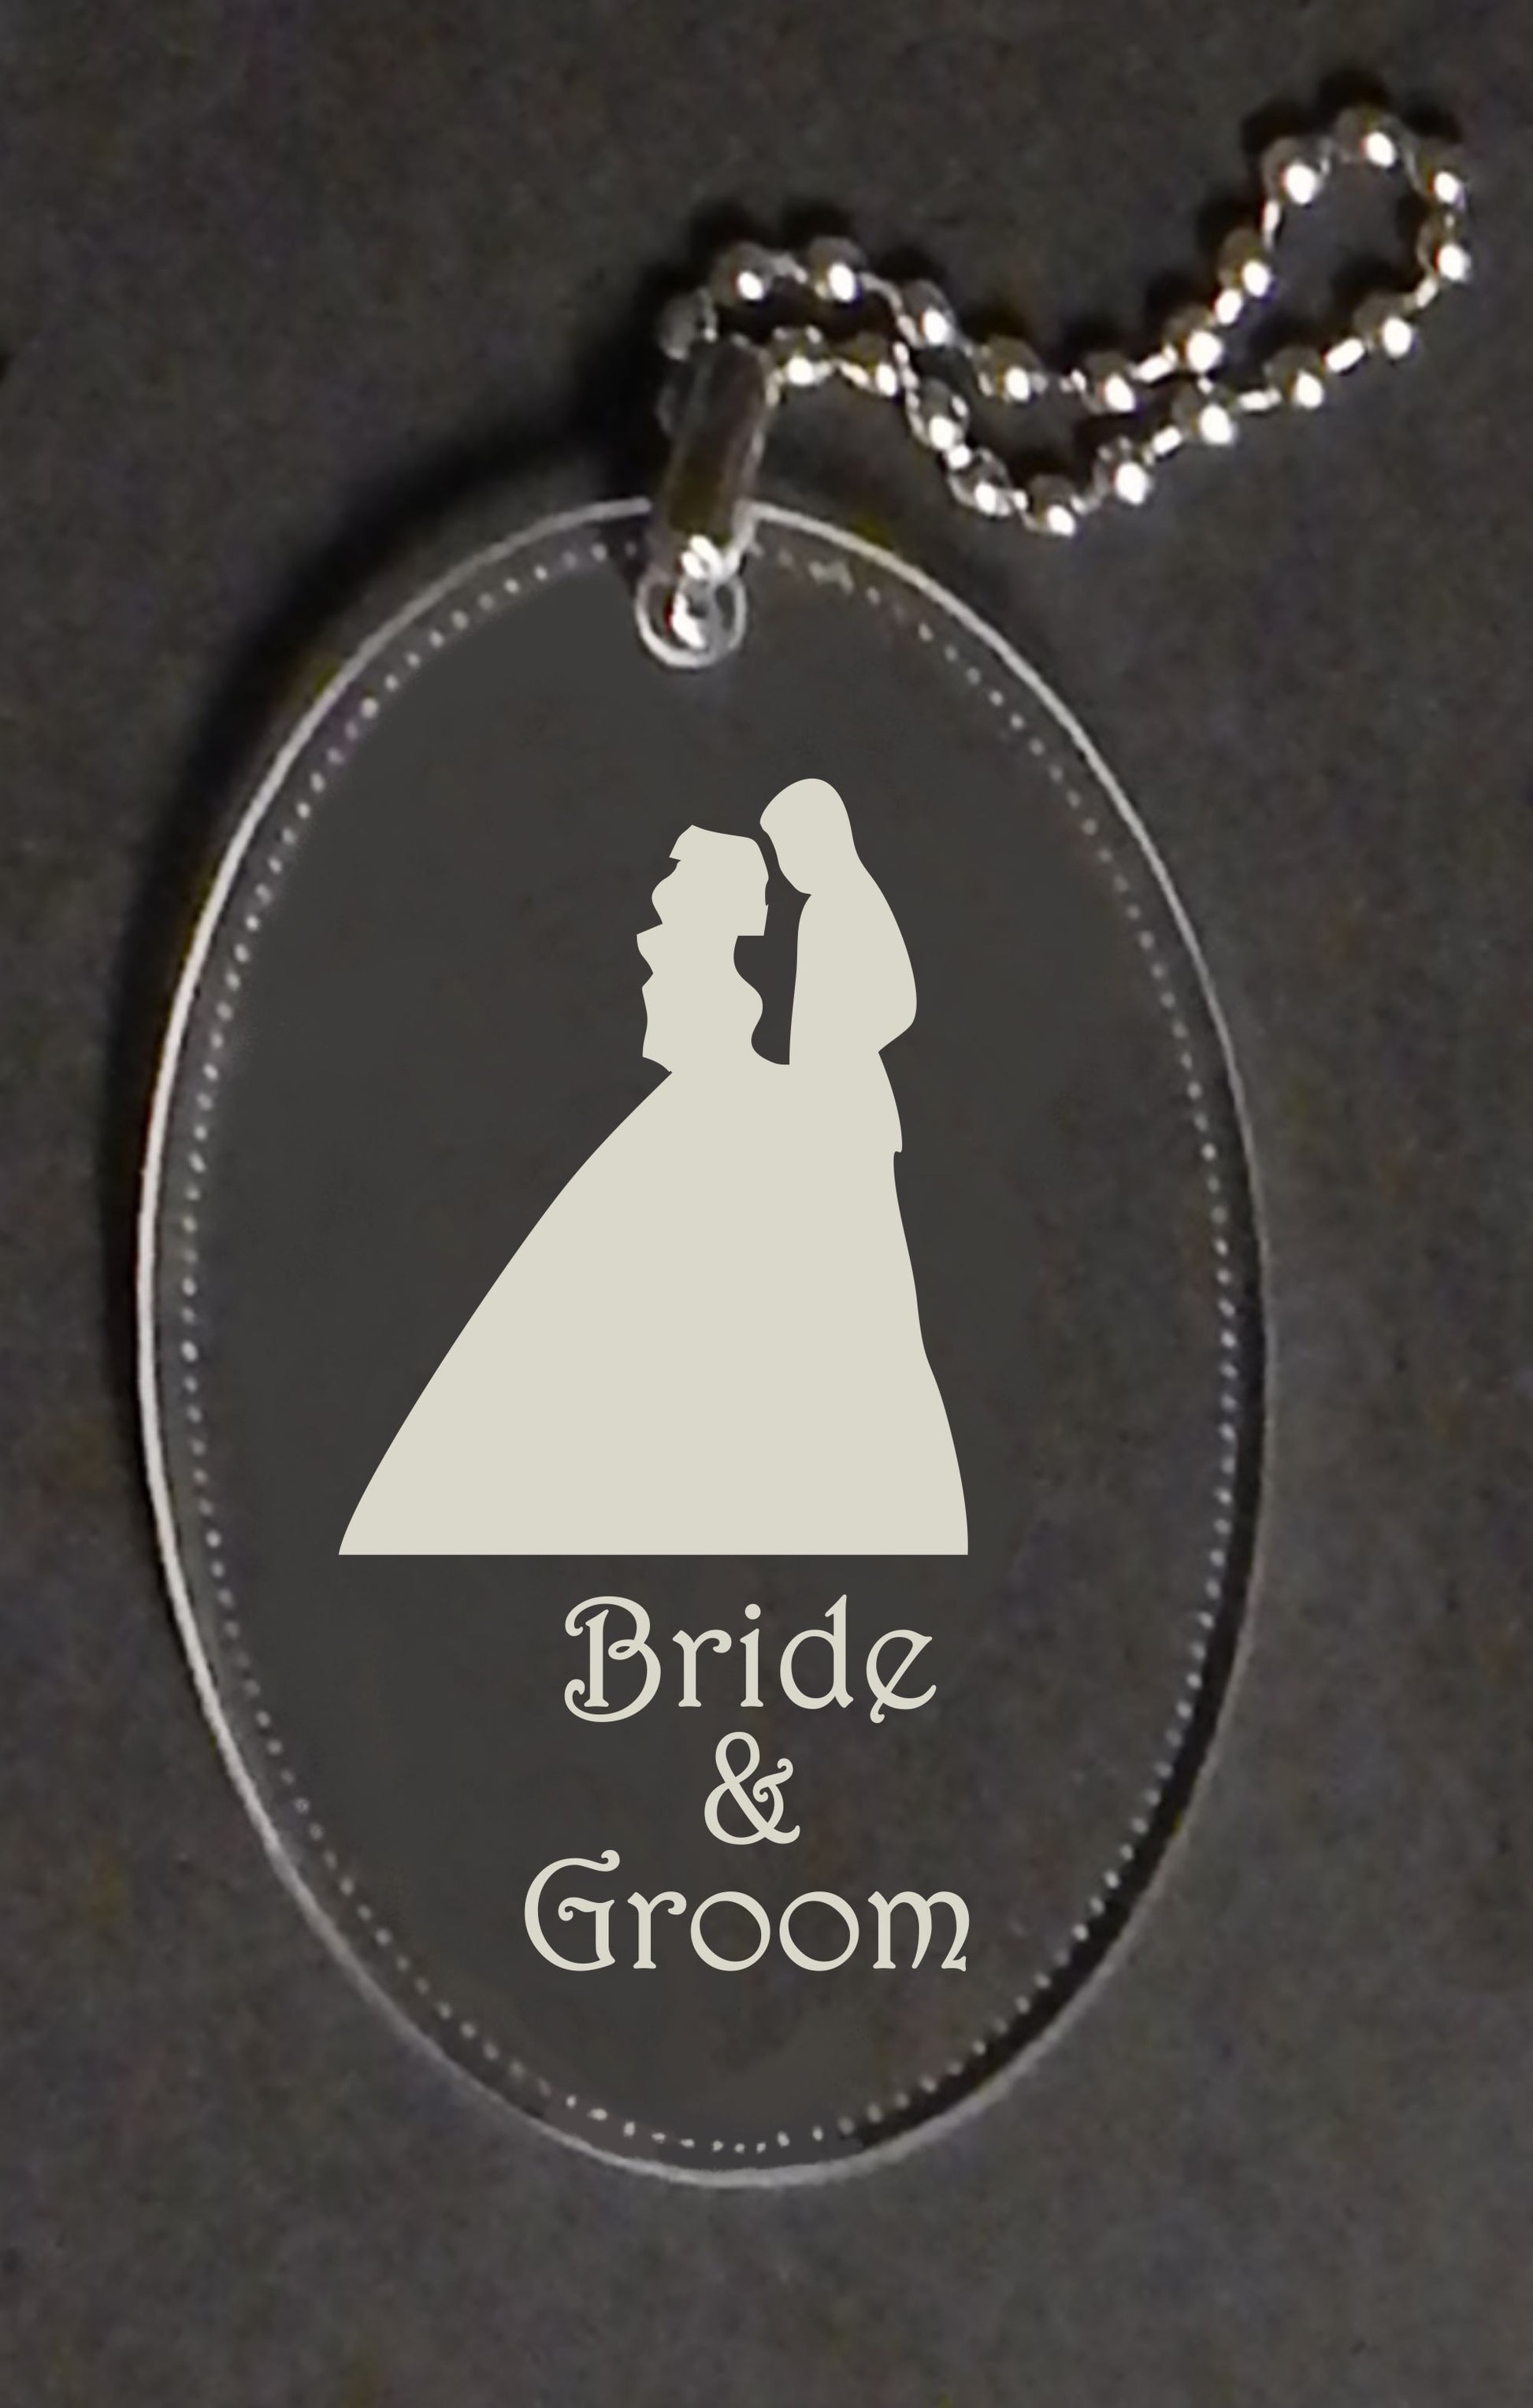 oval keychain designed with a silhouette of man and woman, along with bride and groom names, attached to a small metal chain